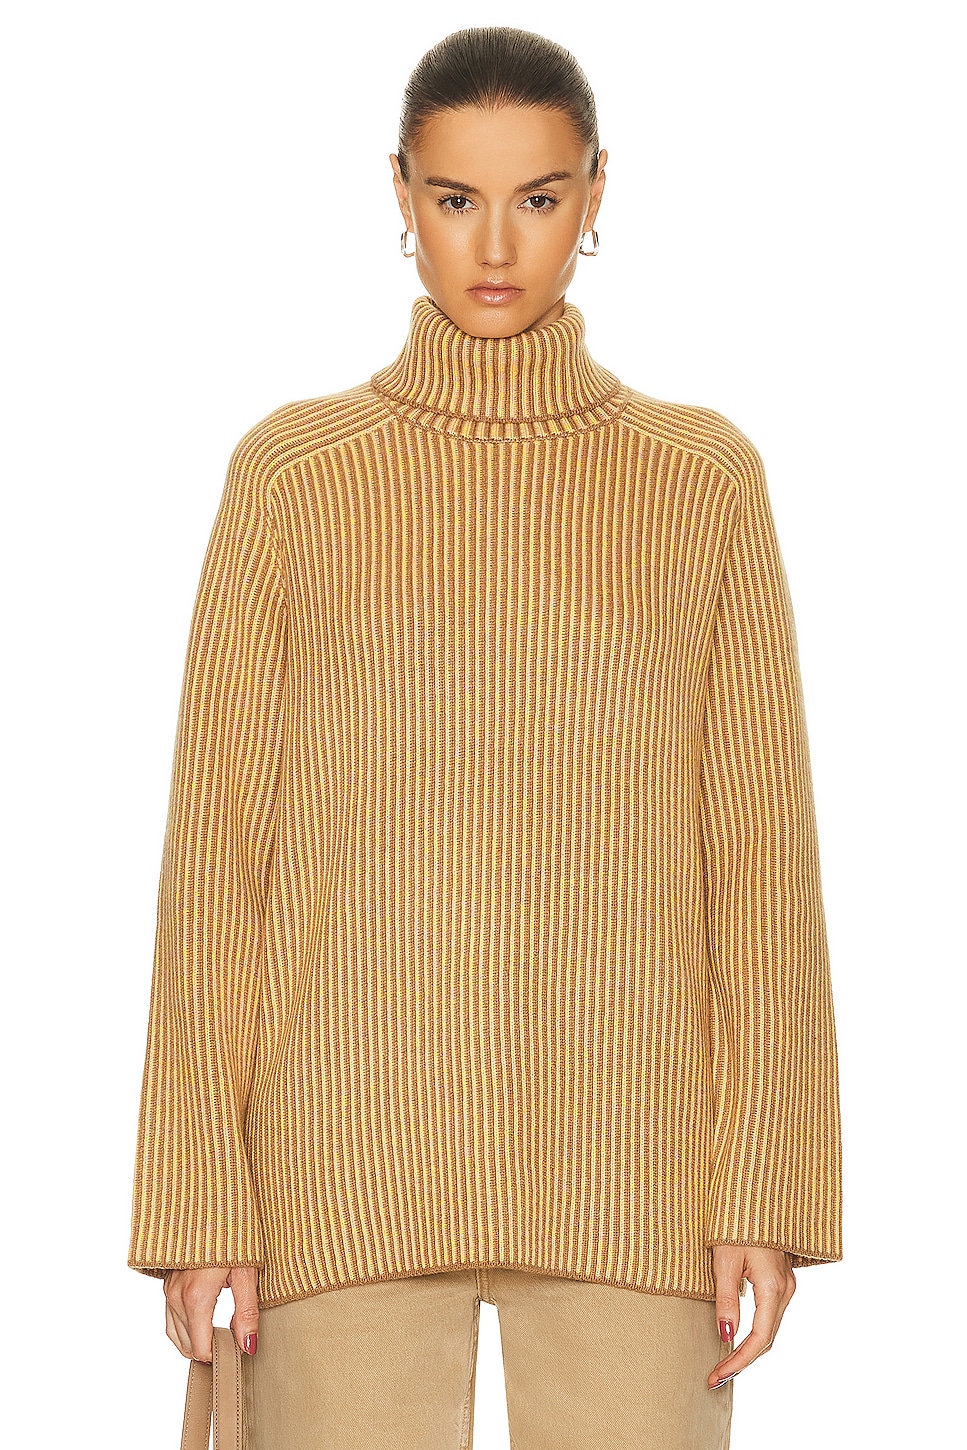 Image 1 of Guest In Residence Tri Rib Turtleneck Sweater in Almond, Coral, & Yellow